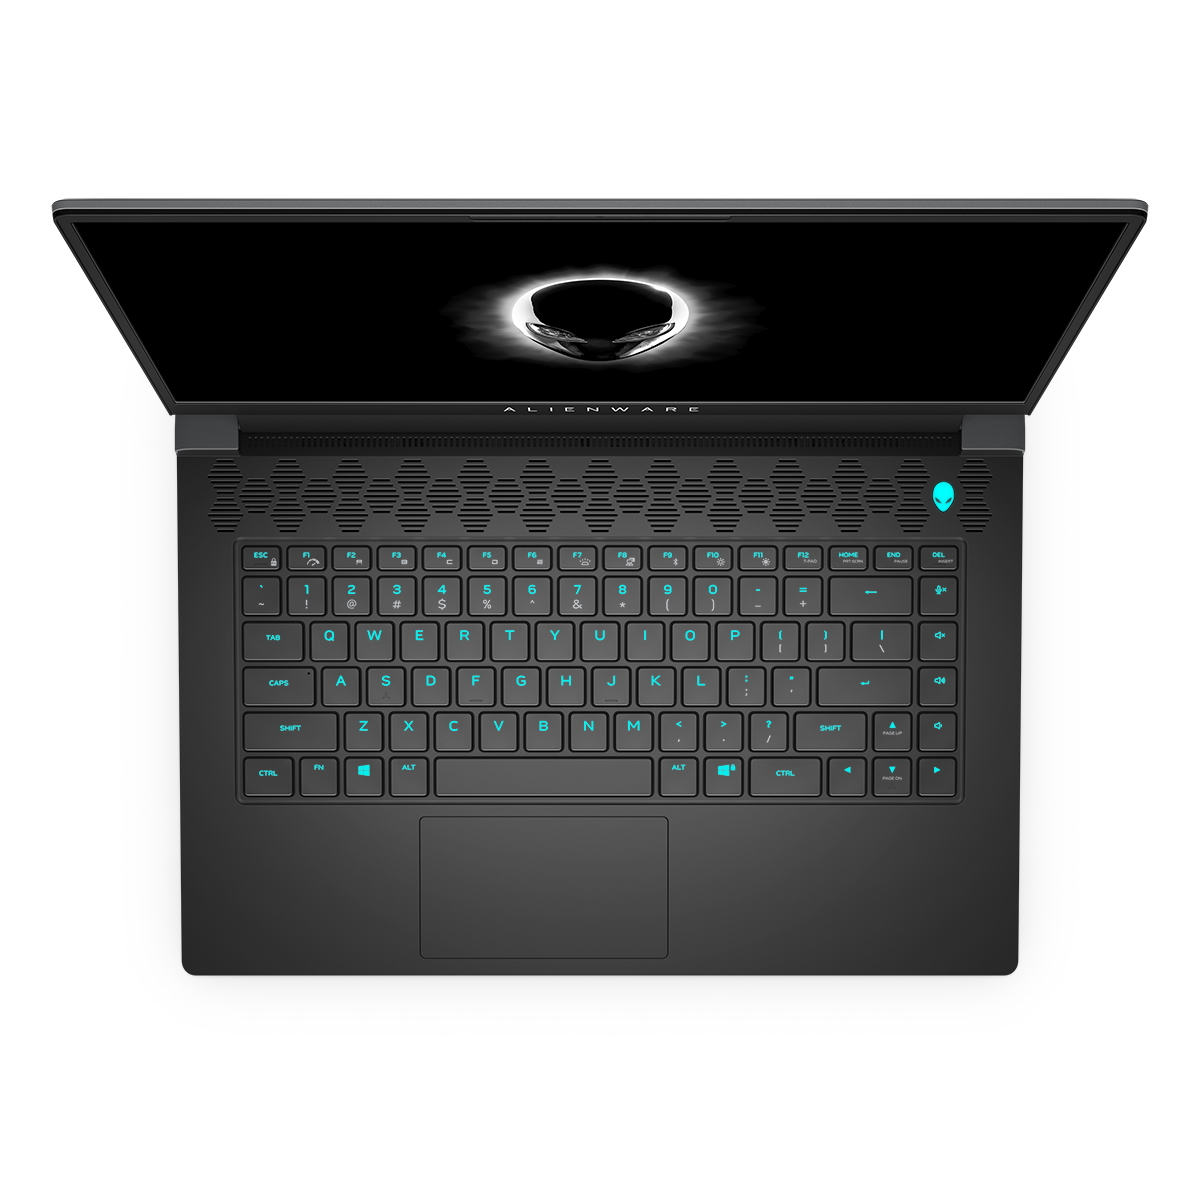 Alienware m15 R5 laptops being sold with crippled RTX 3070 Laptop laptop GPUs, m15 R4 RTX 3070 VBIOS flash urged as a non permanent workaround